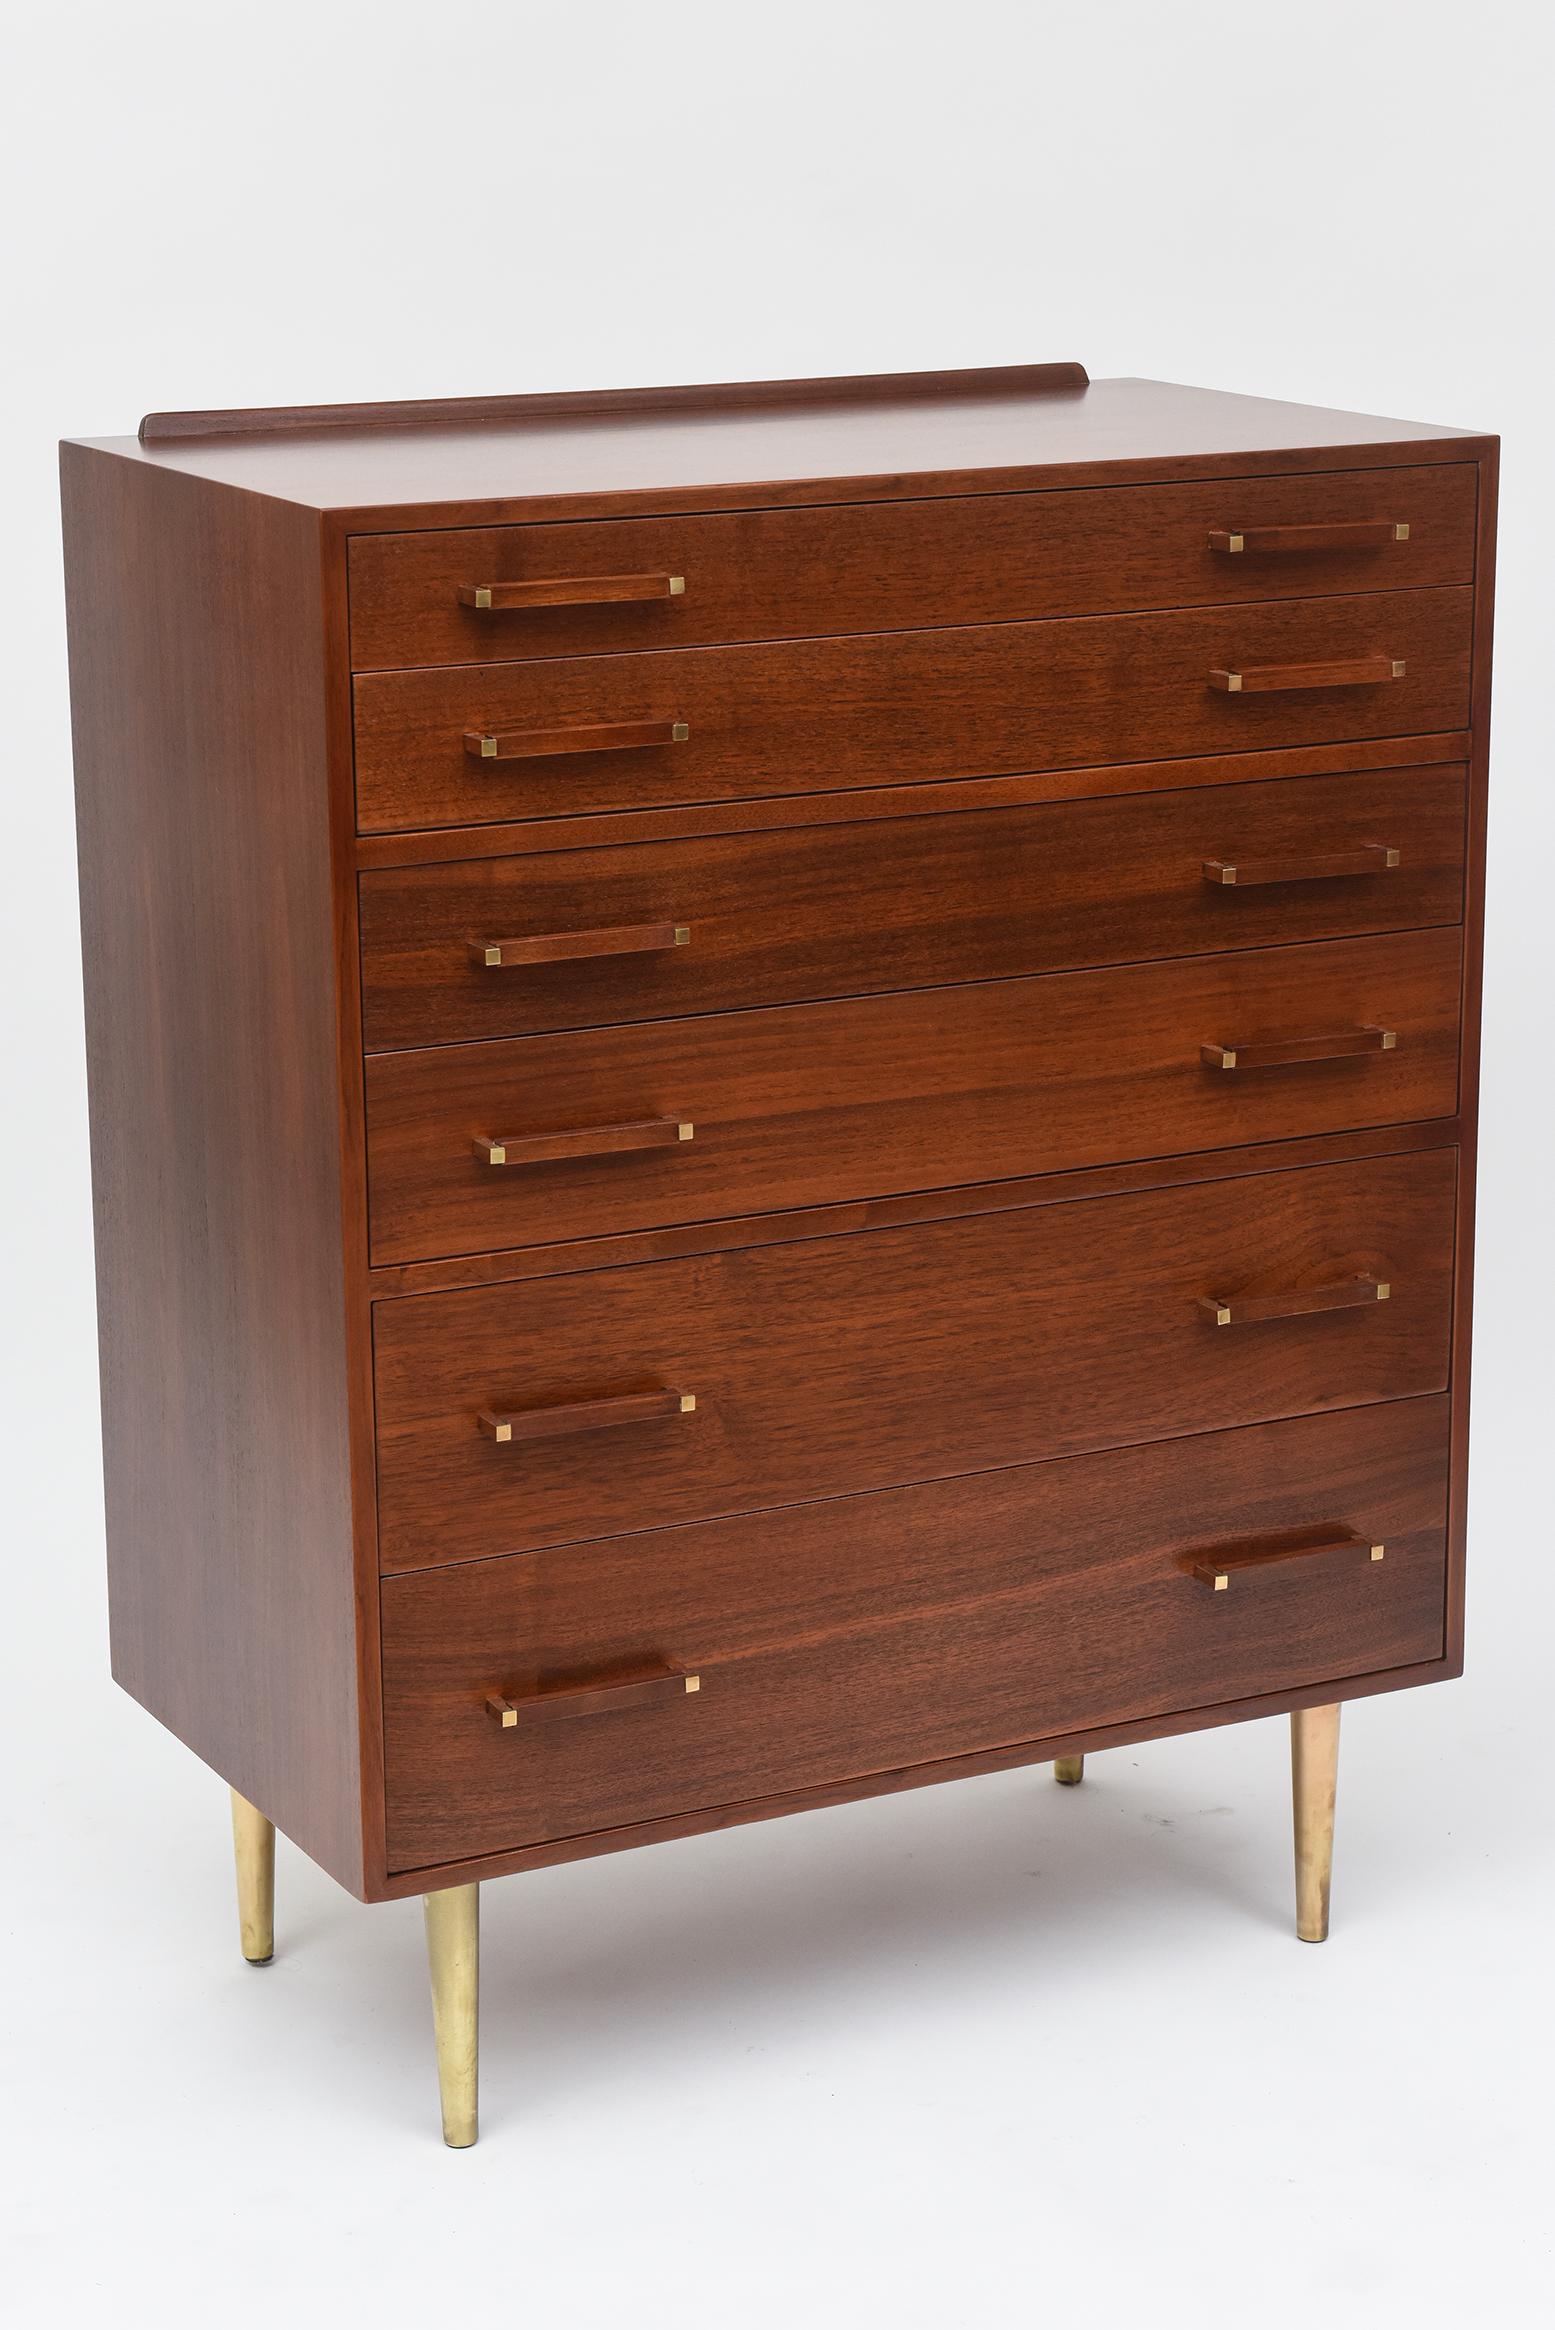 Designed by Edward Wormley, this exceptional 1950s walnut tall dresser, with its solid brass legs and polished handle details, possesses all the style and quality craftsmanship for which Dunbar is known and prized today.